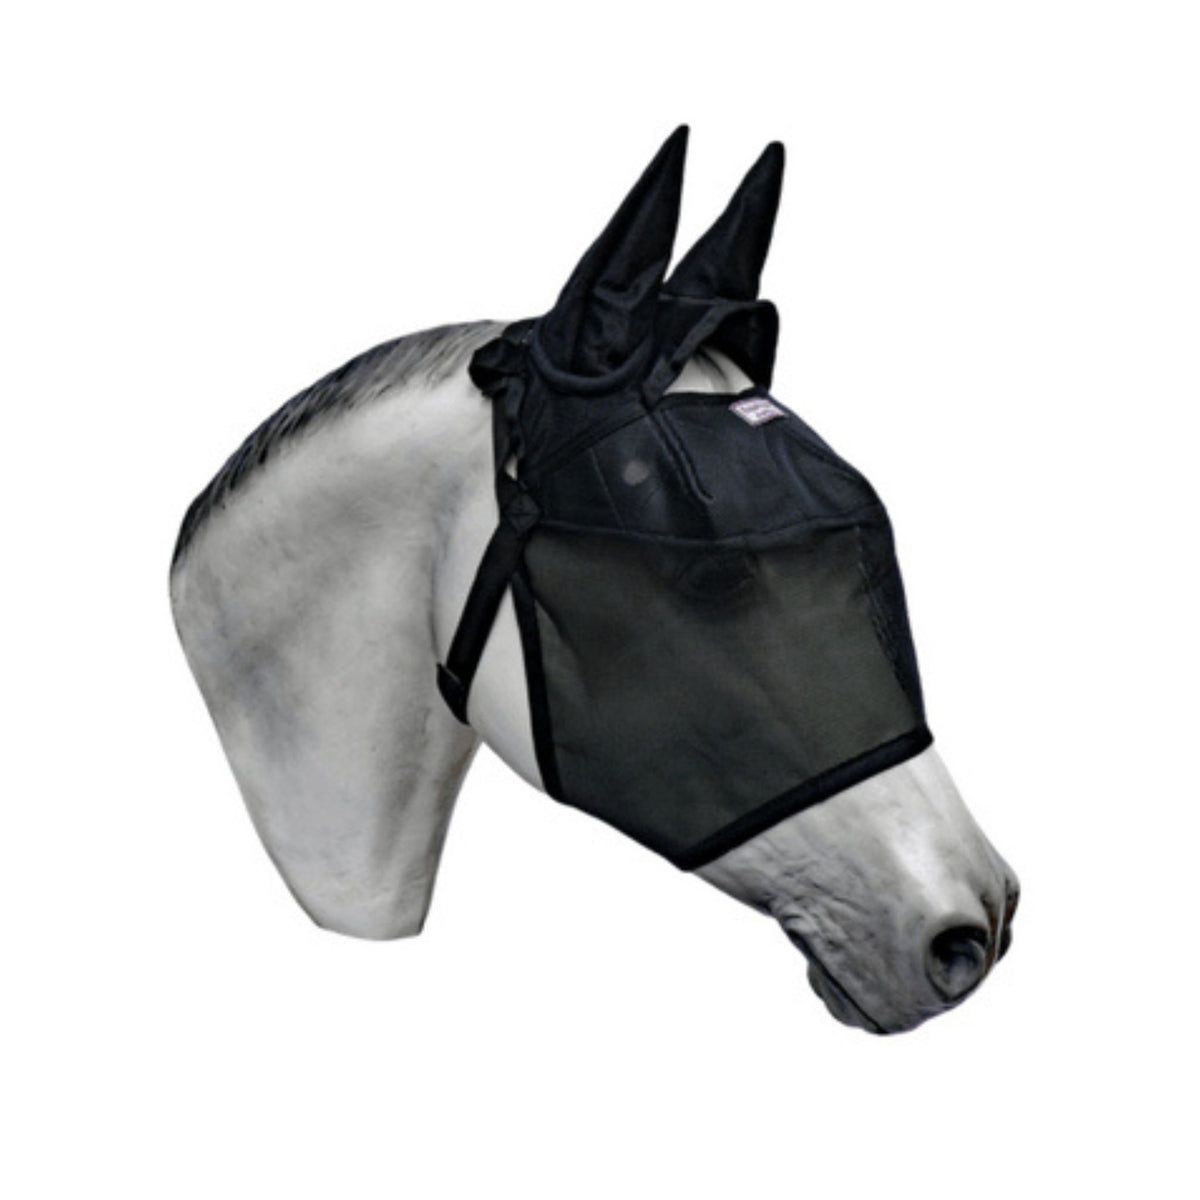 Side of model horse with black fly mask with ear covering component.